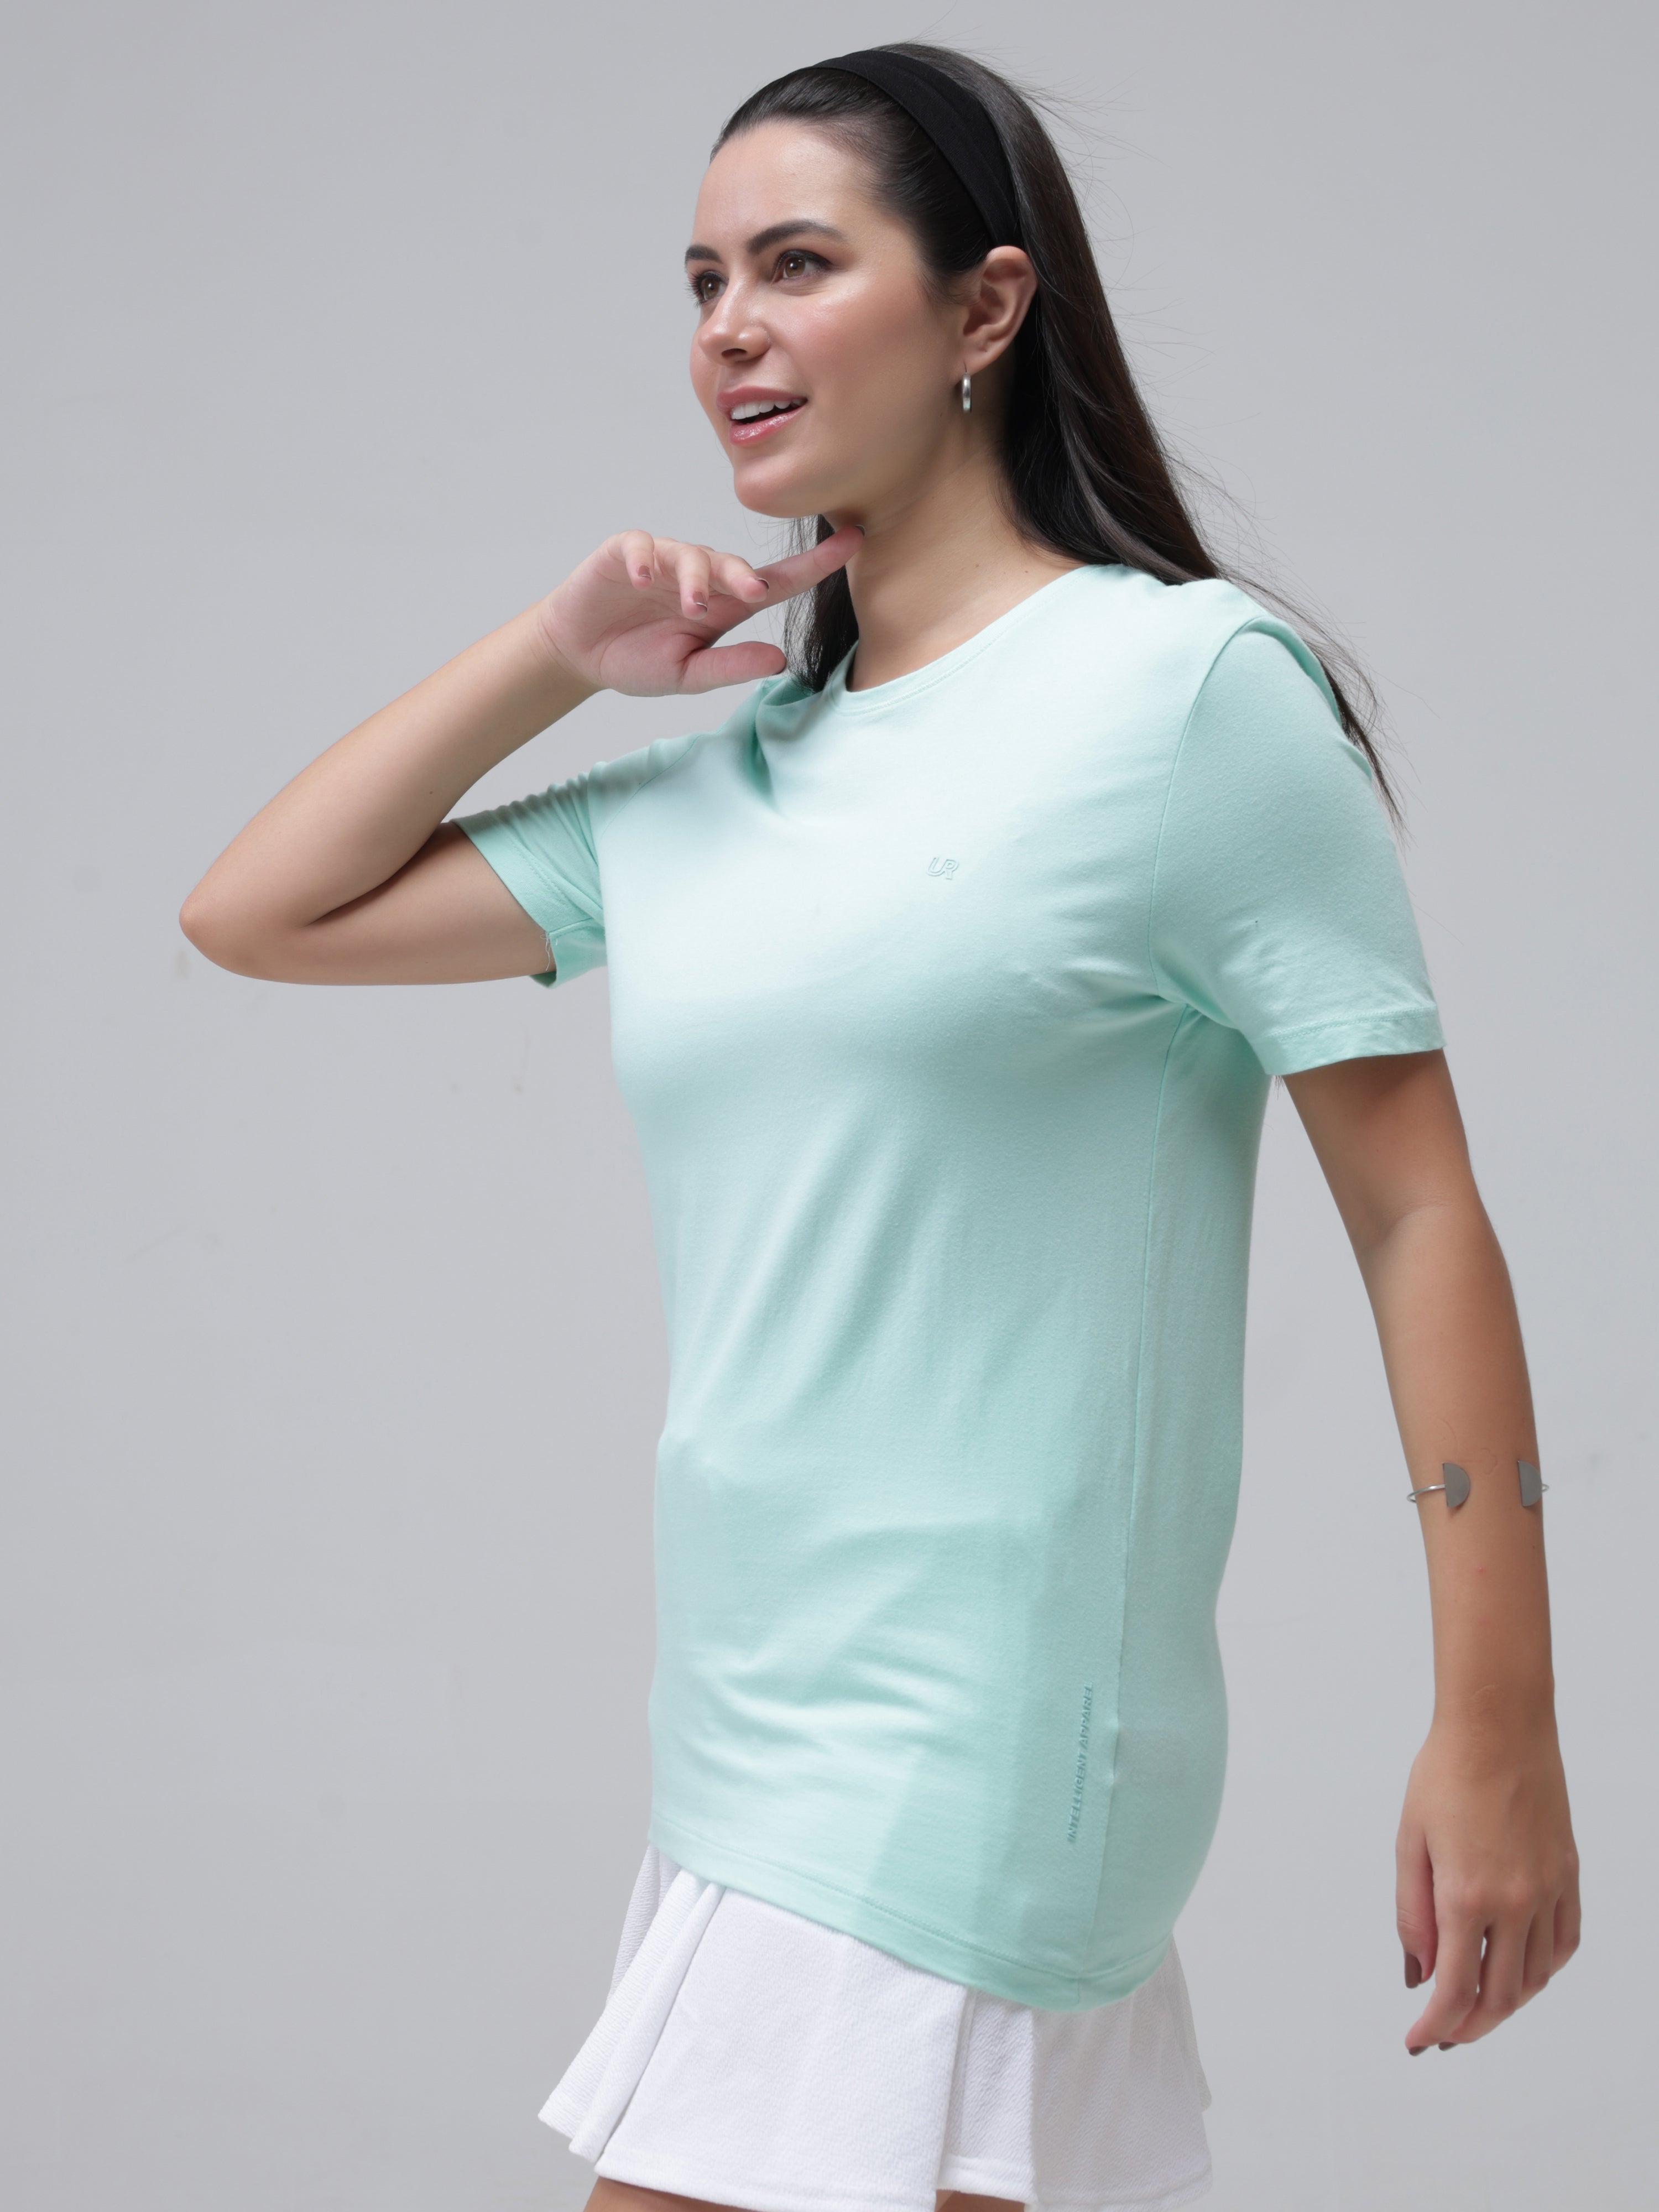 Woman wearing a stylish light aqua round-neck t-shirt, perfect for casual wear and made from premium cotton with stain-proof and odor-resistant features.